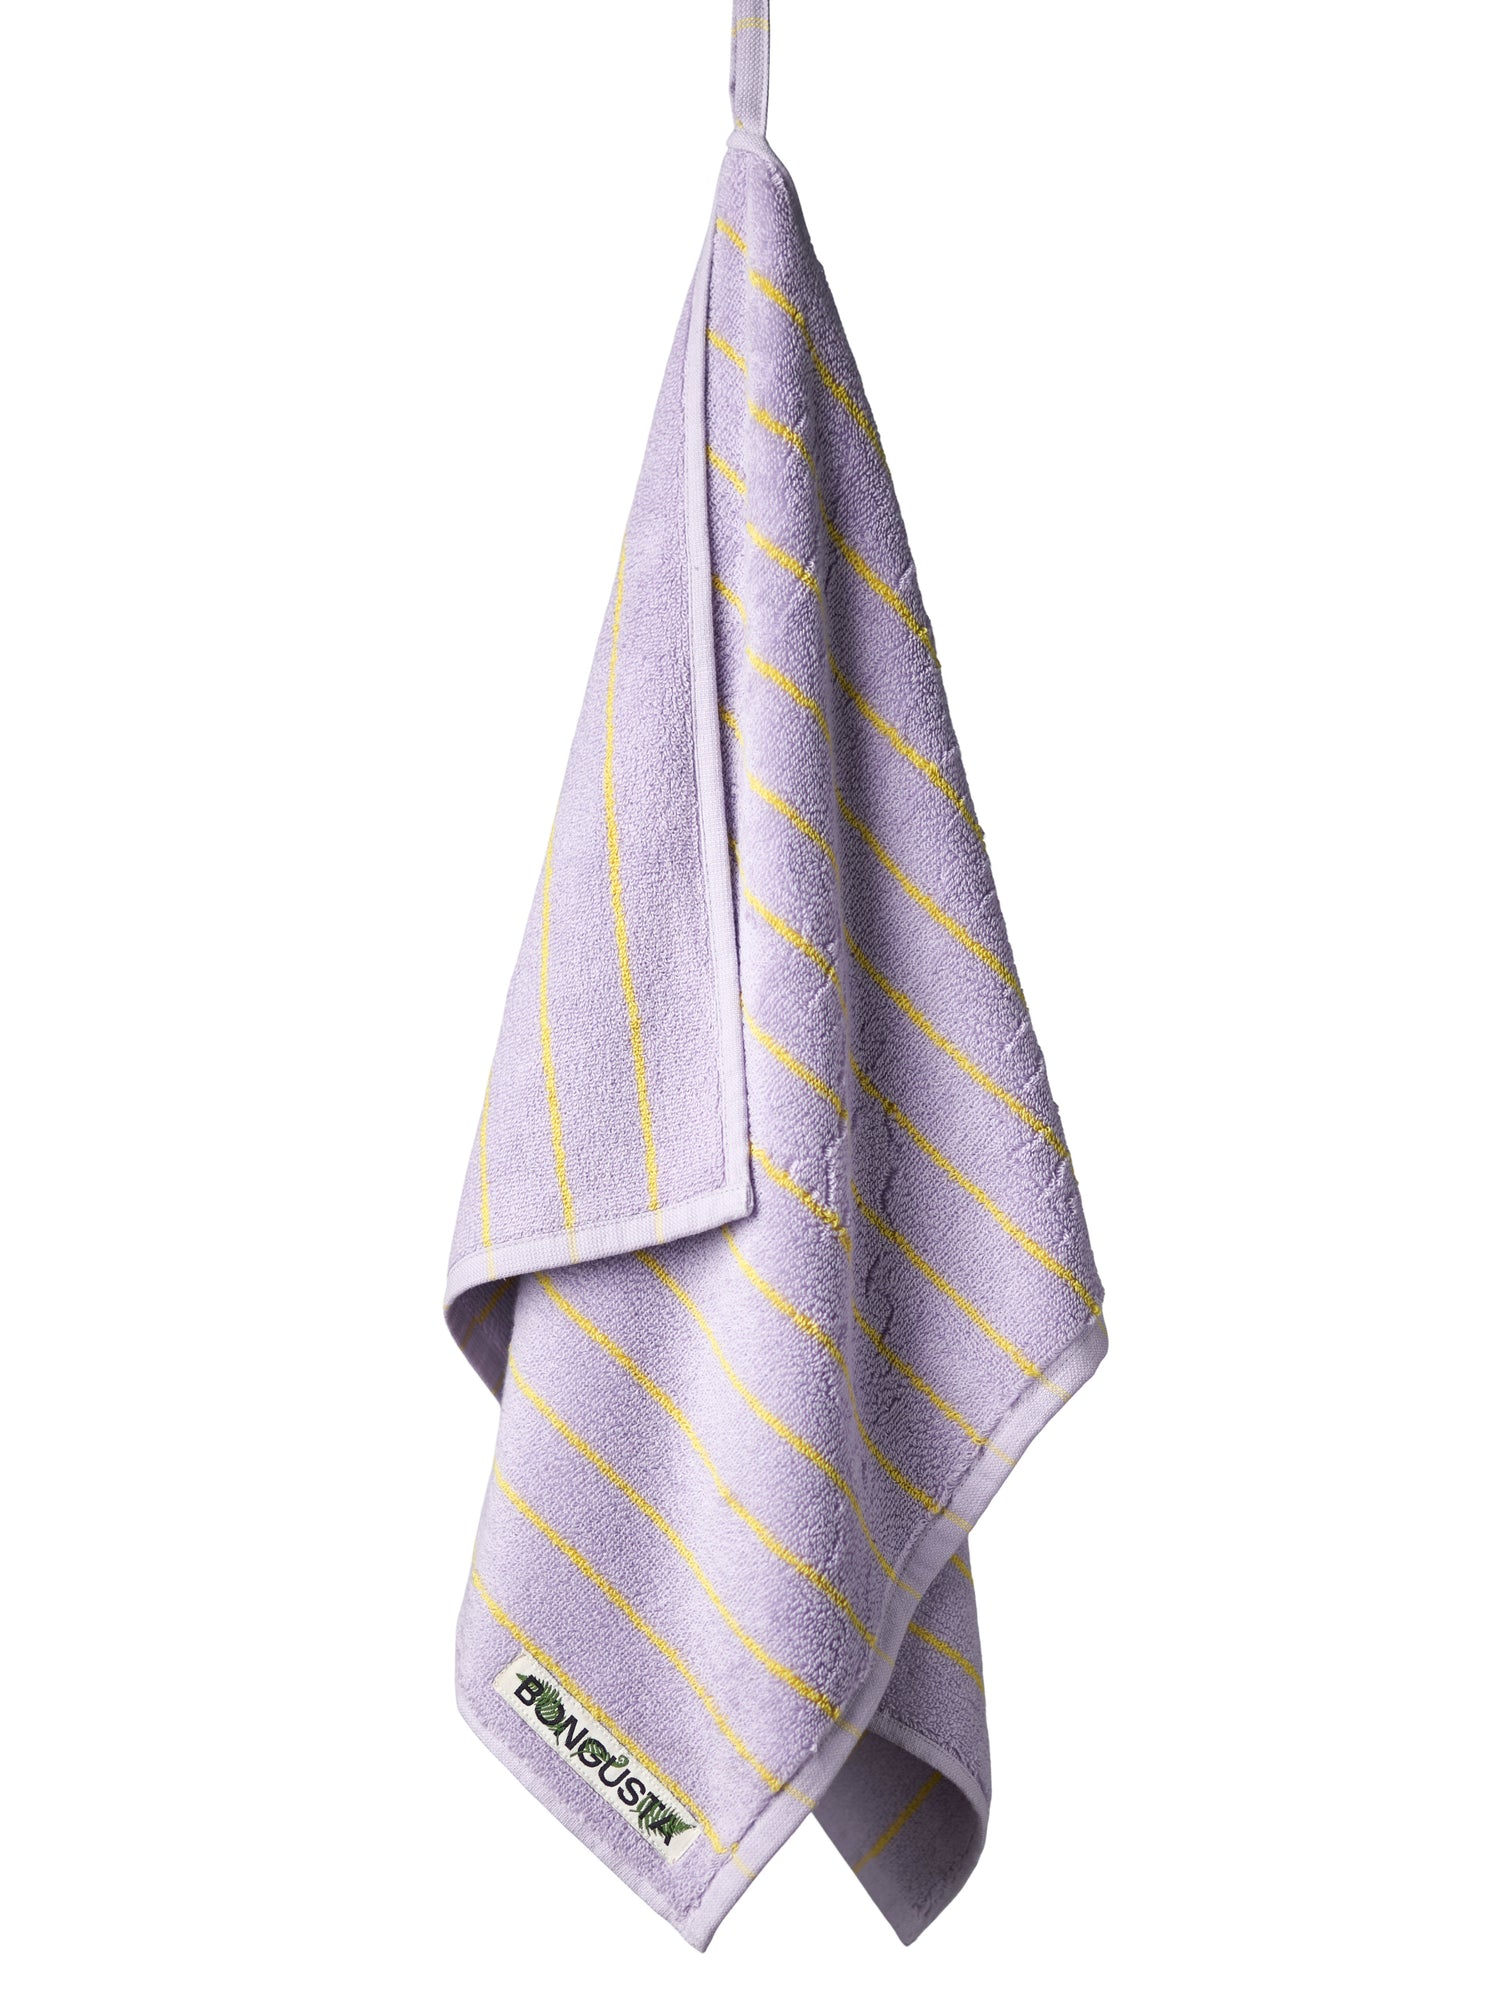 Naram guest towels, lilac & neon yellow